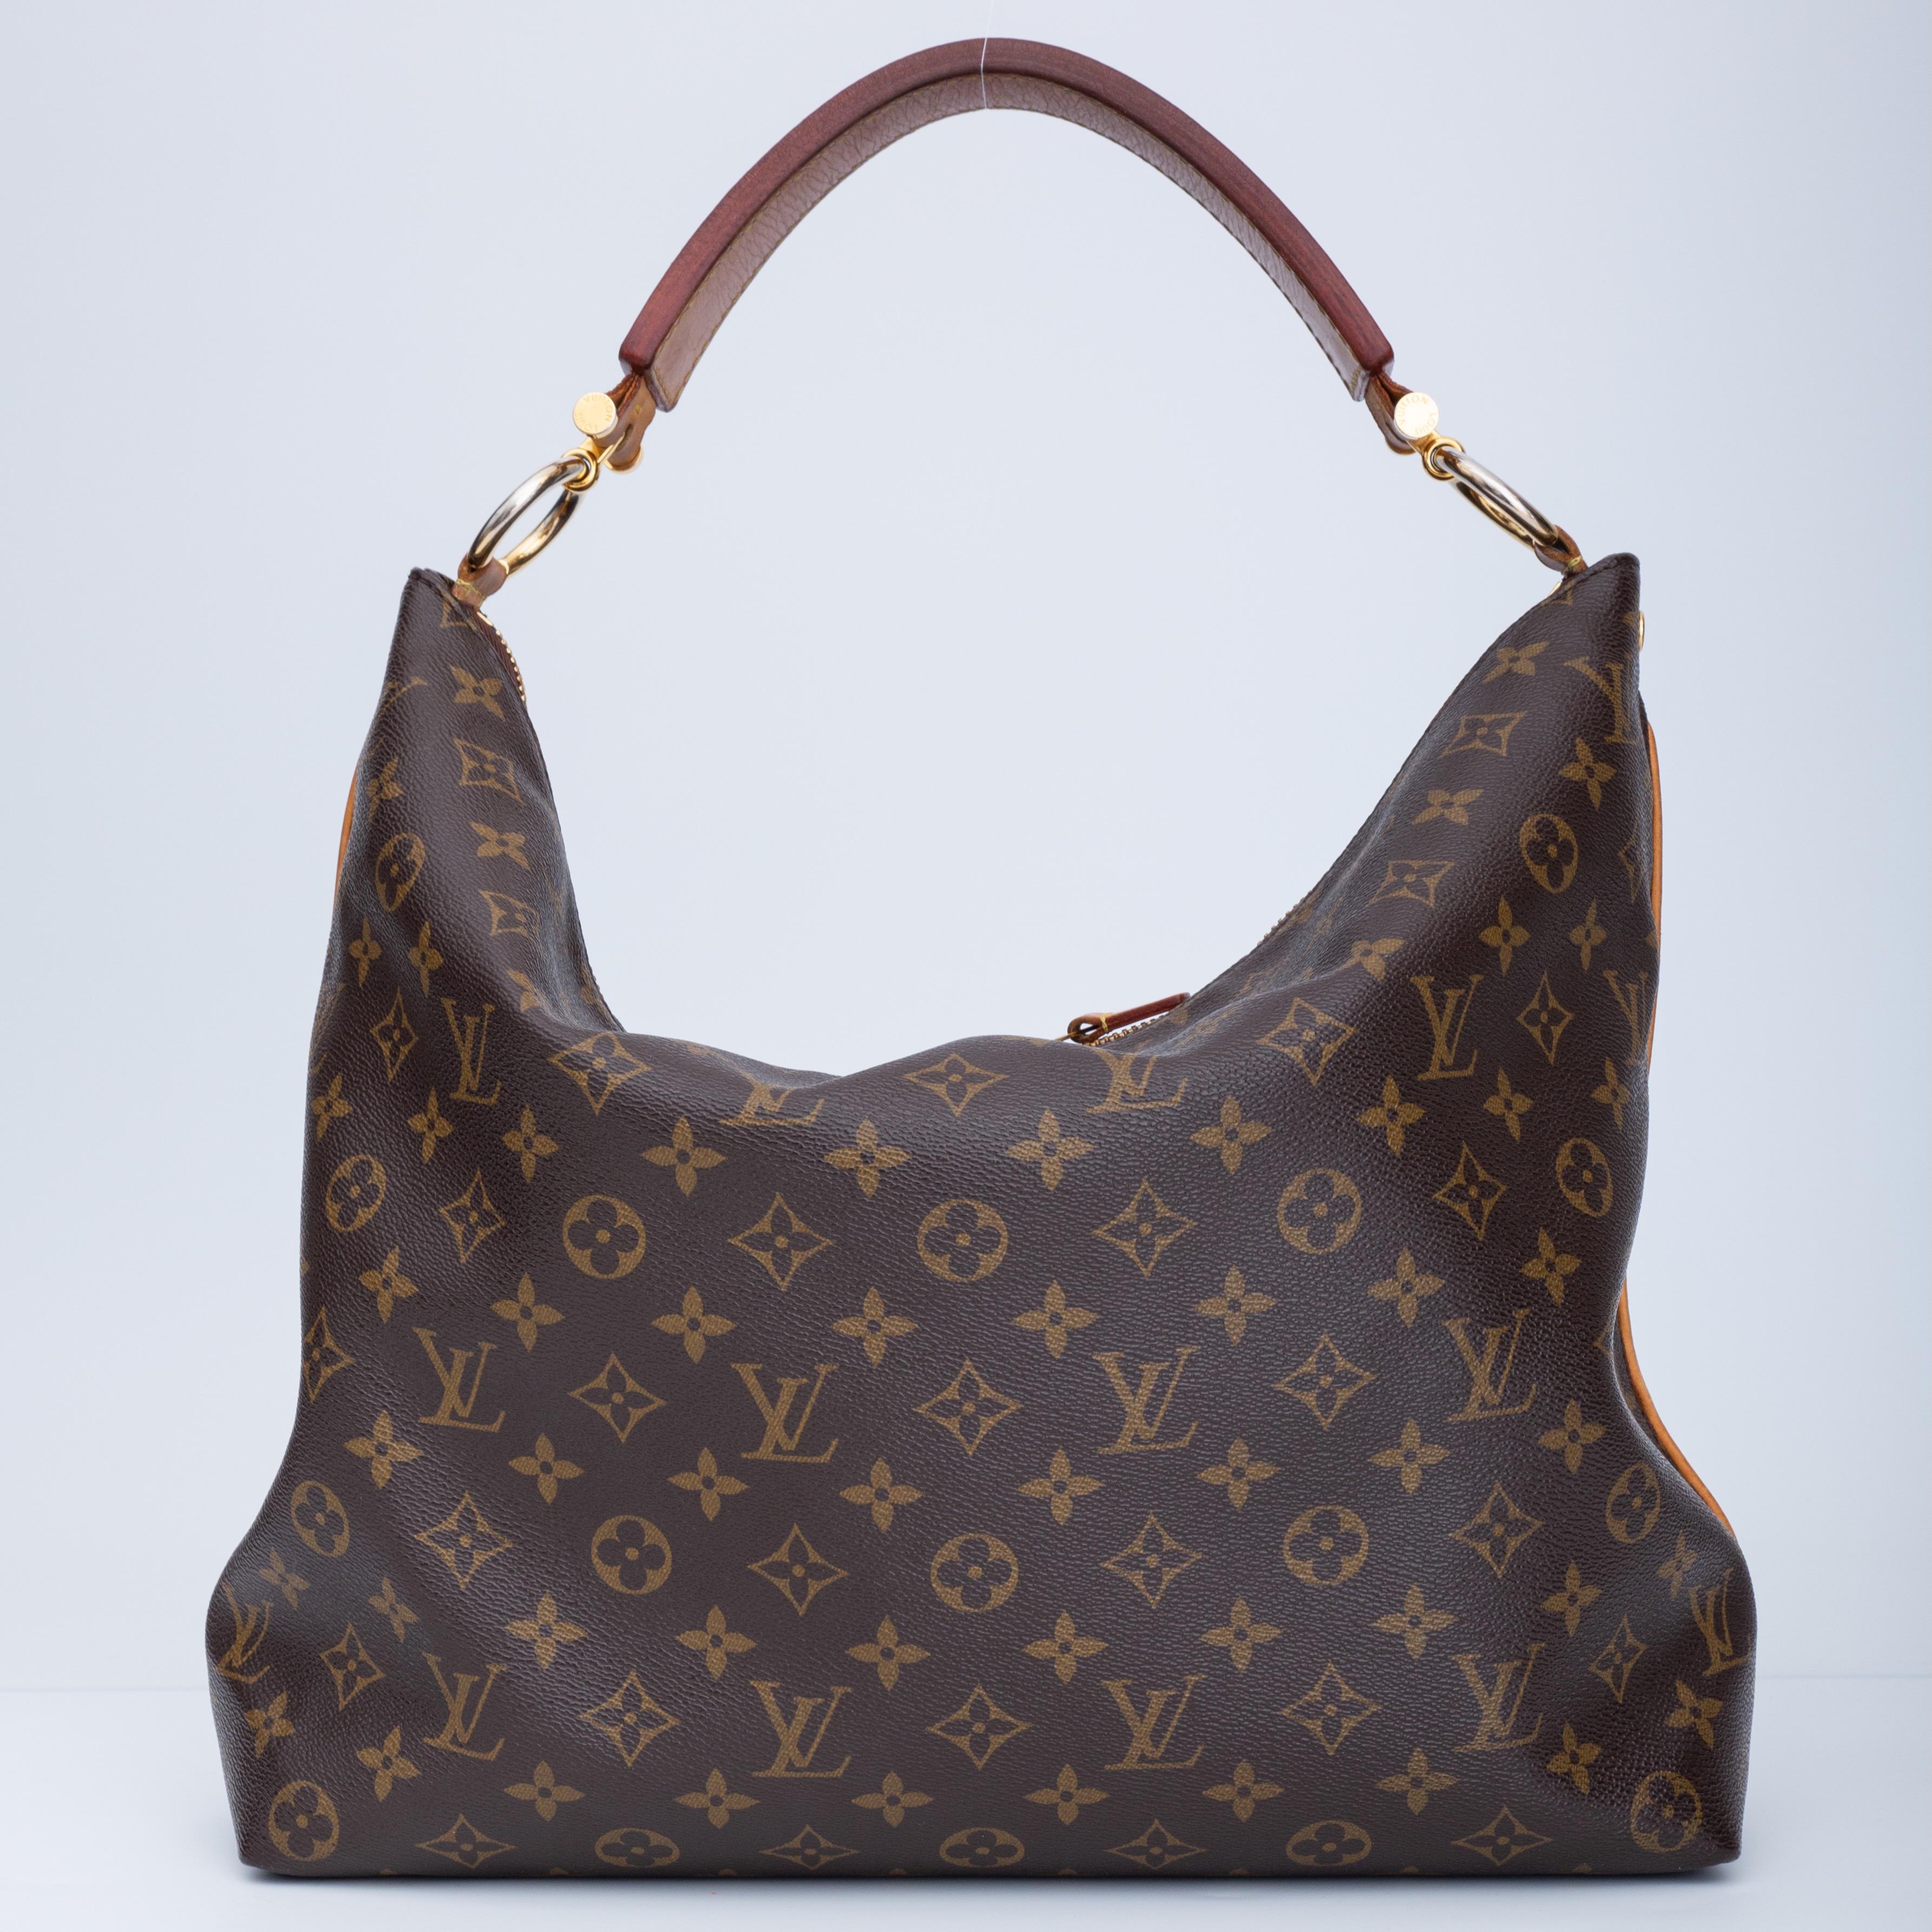 This tote bag is made of coated canvas with lv’s monogram print. The bag has a hobo relaxed shape, a flat leather top handle, gold tone circular links connecting the top handle, top zip closure with double zippers and brown woven fabric with silk